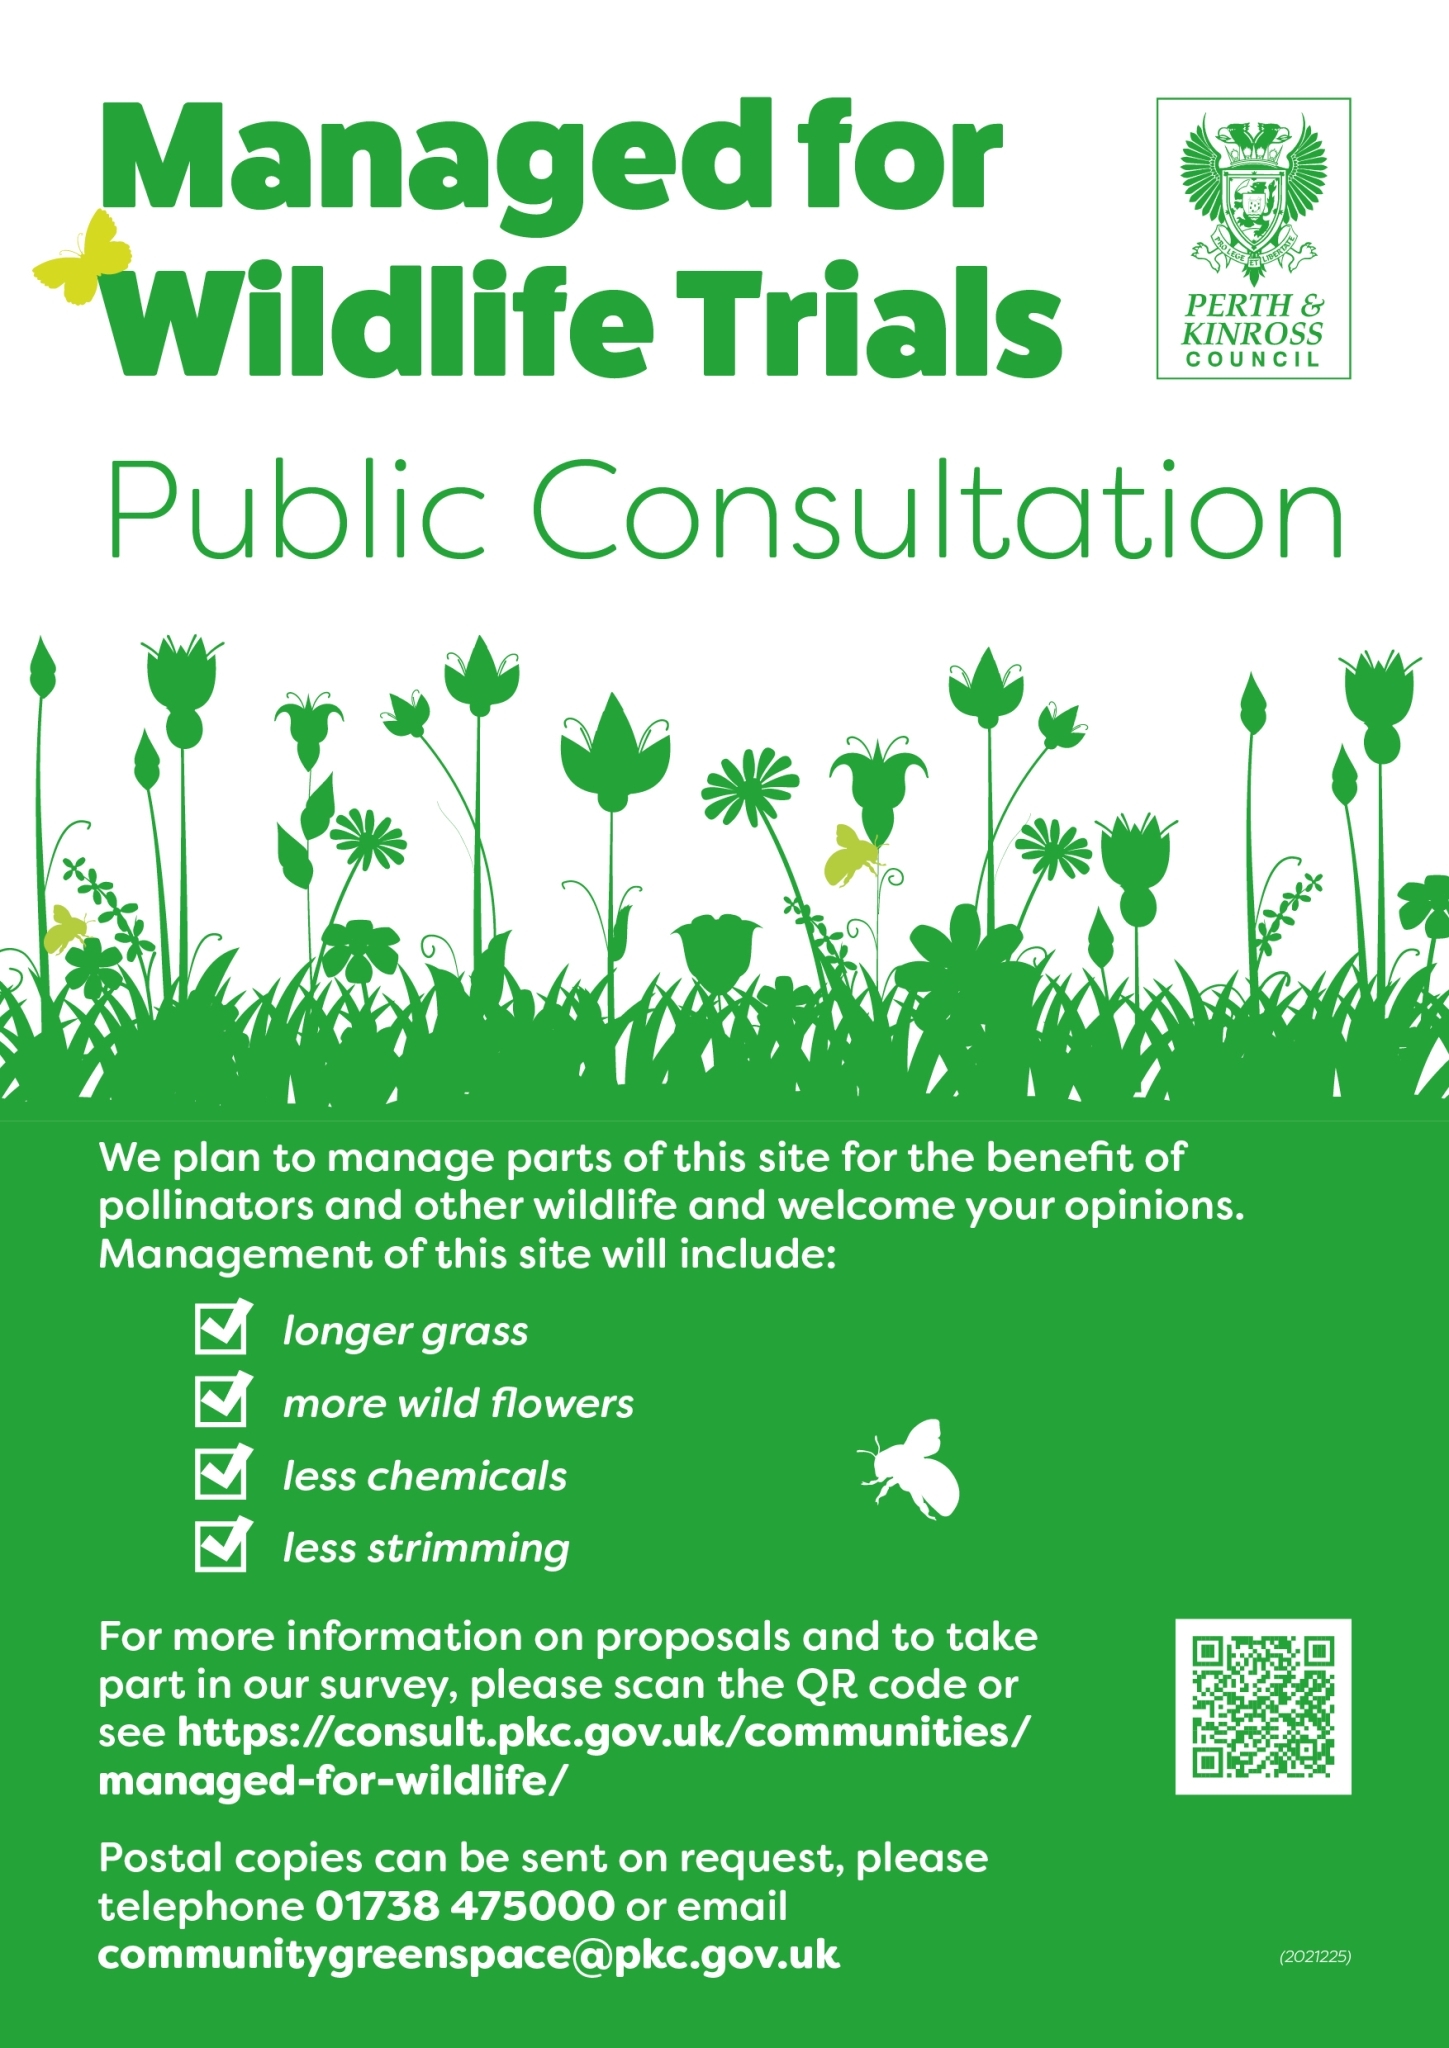 Image: Managed for Wildlife Trials Consultation